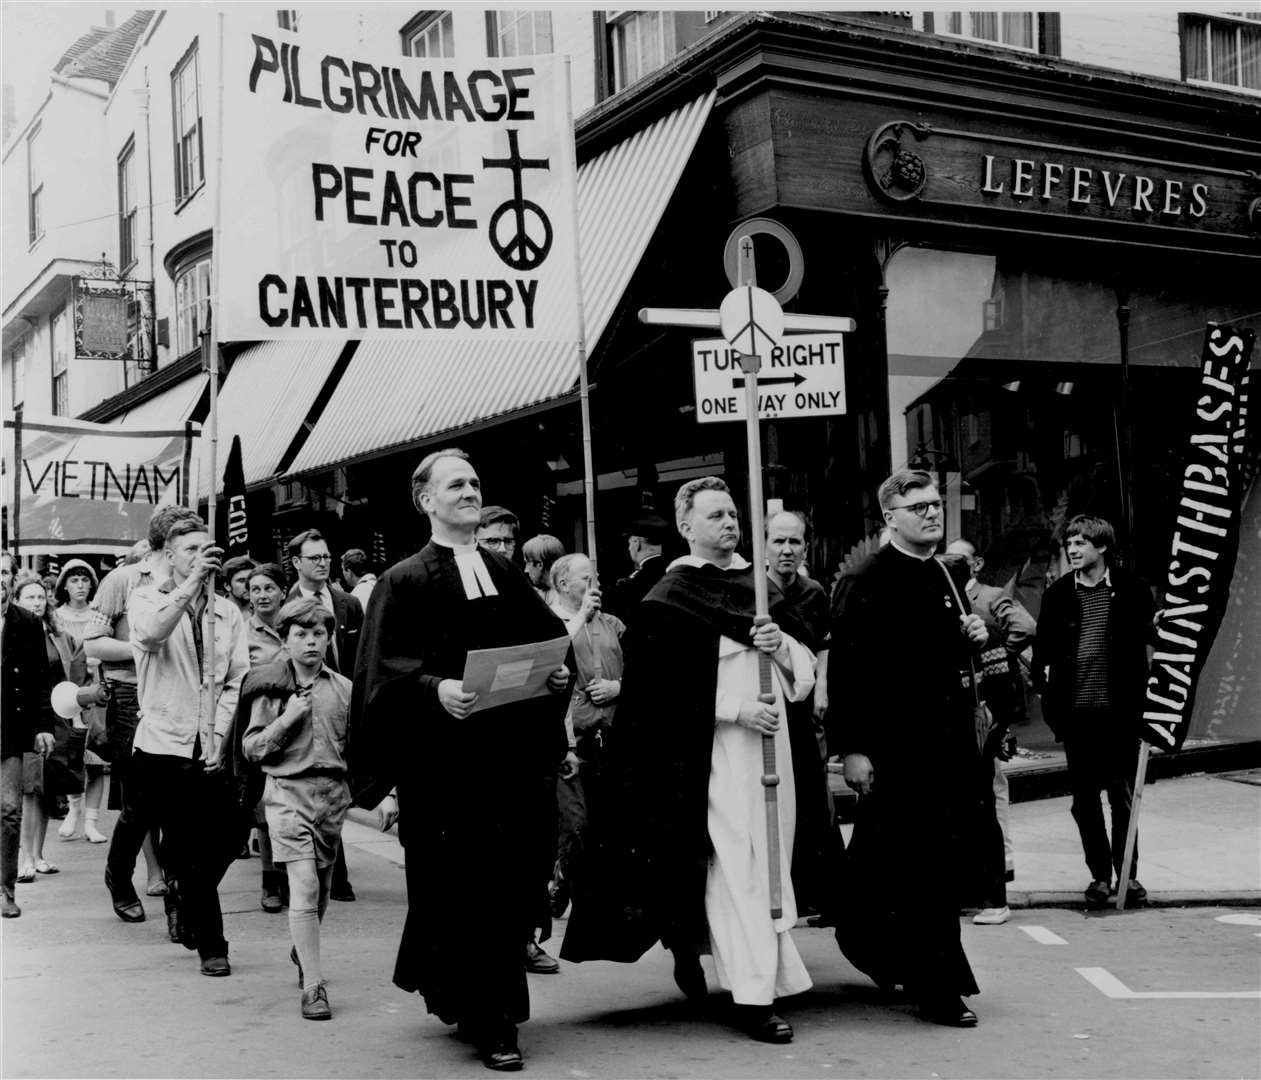 300 supporters of the Christian Group of CND, pilgrims for peace, completed their walk from Southwark to Canterbury in June 1965